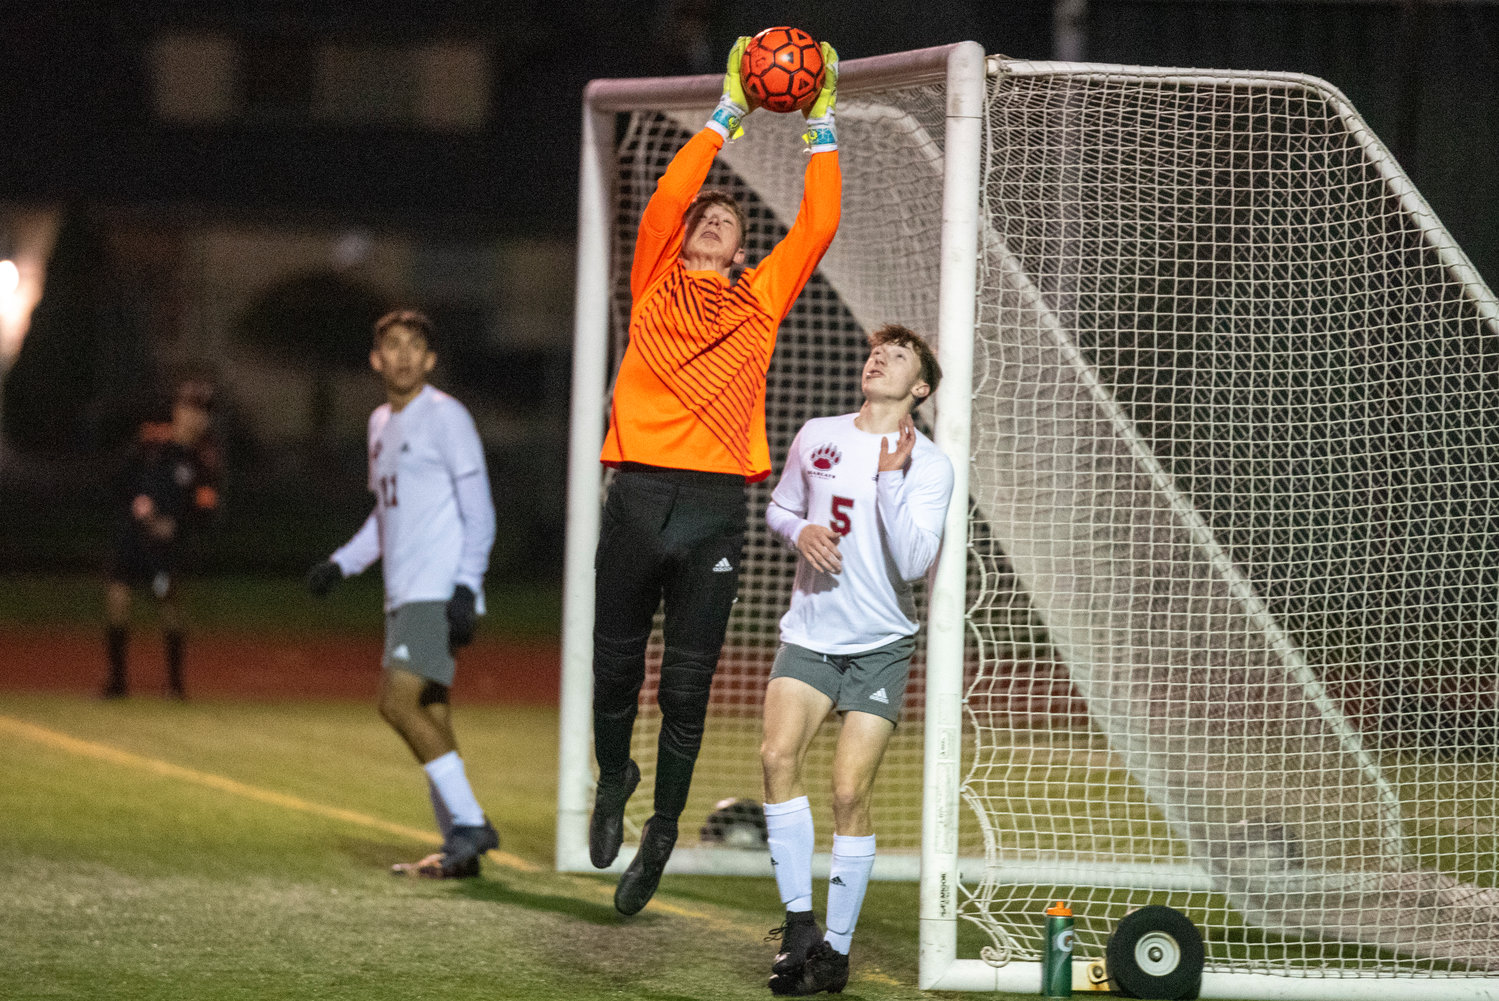 W.F. West keeper Hayden Sciera makes a leaping save against Centralia in regulation on April 22.